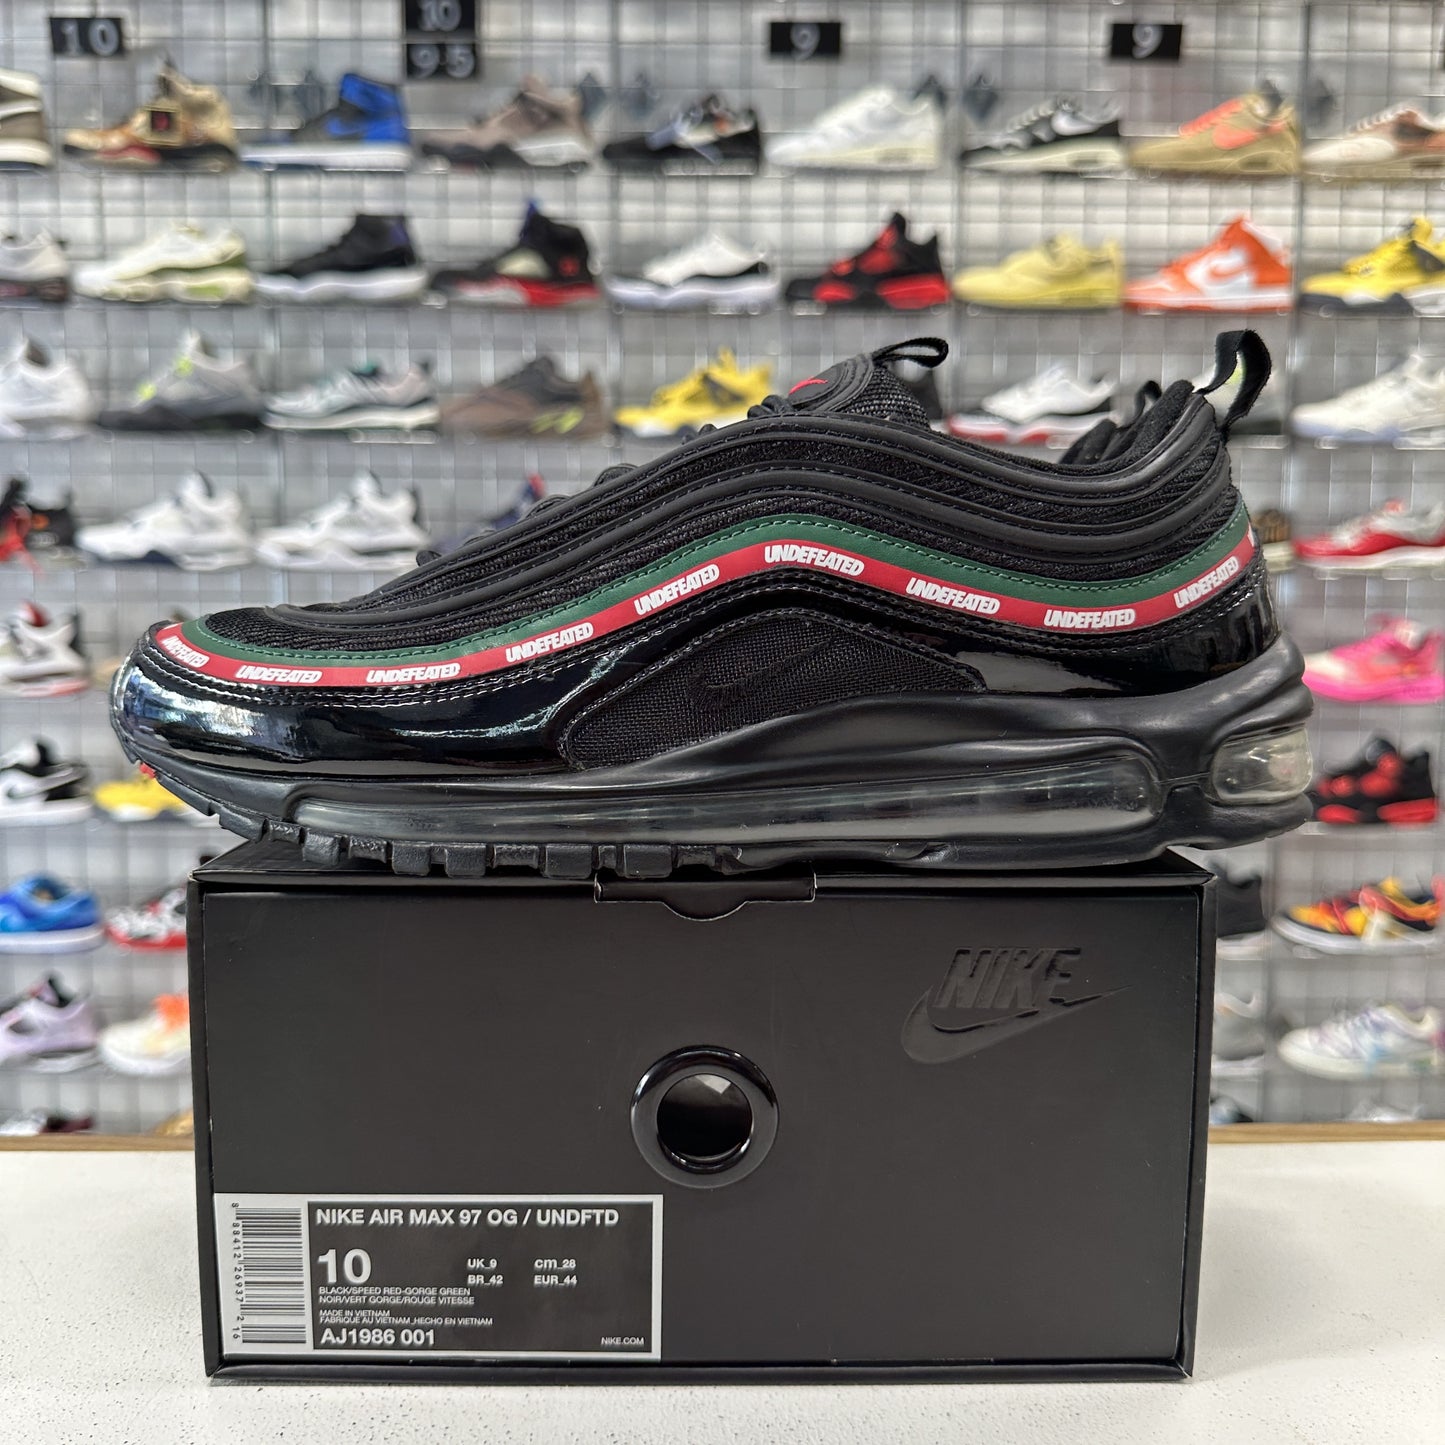 Nike Air Max 97 'Undefeated Black' UK9